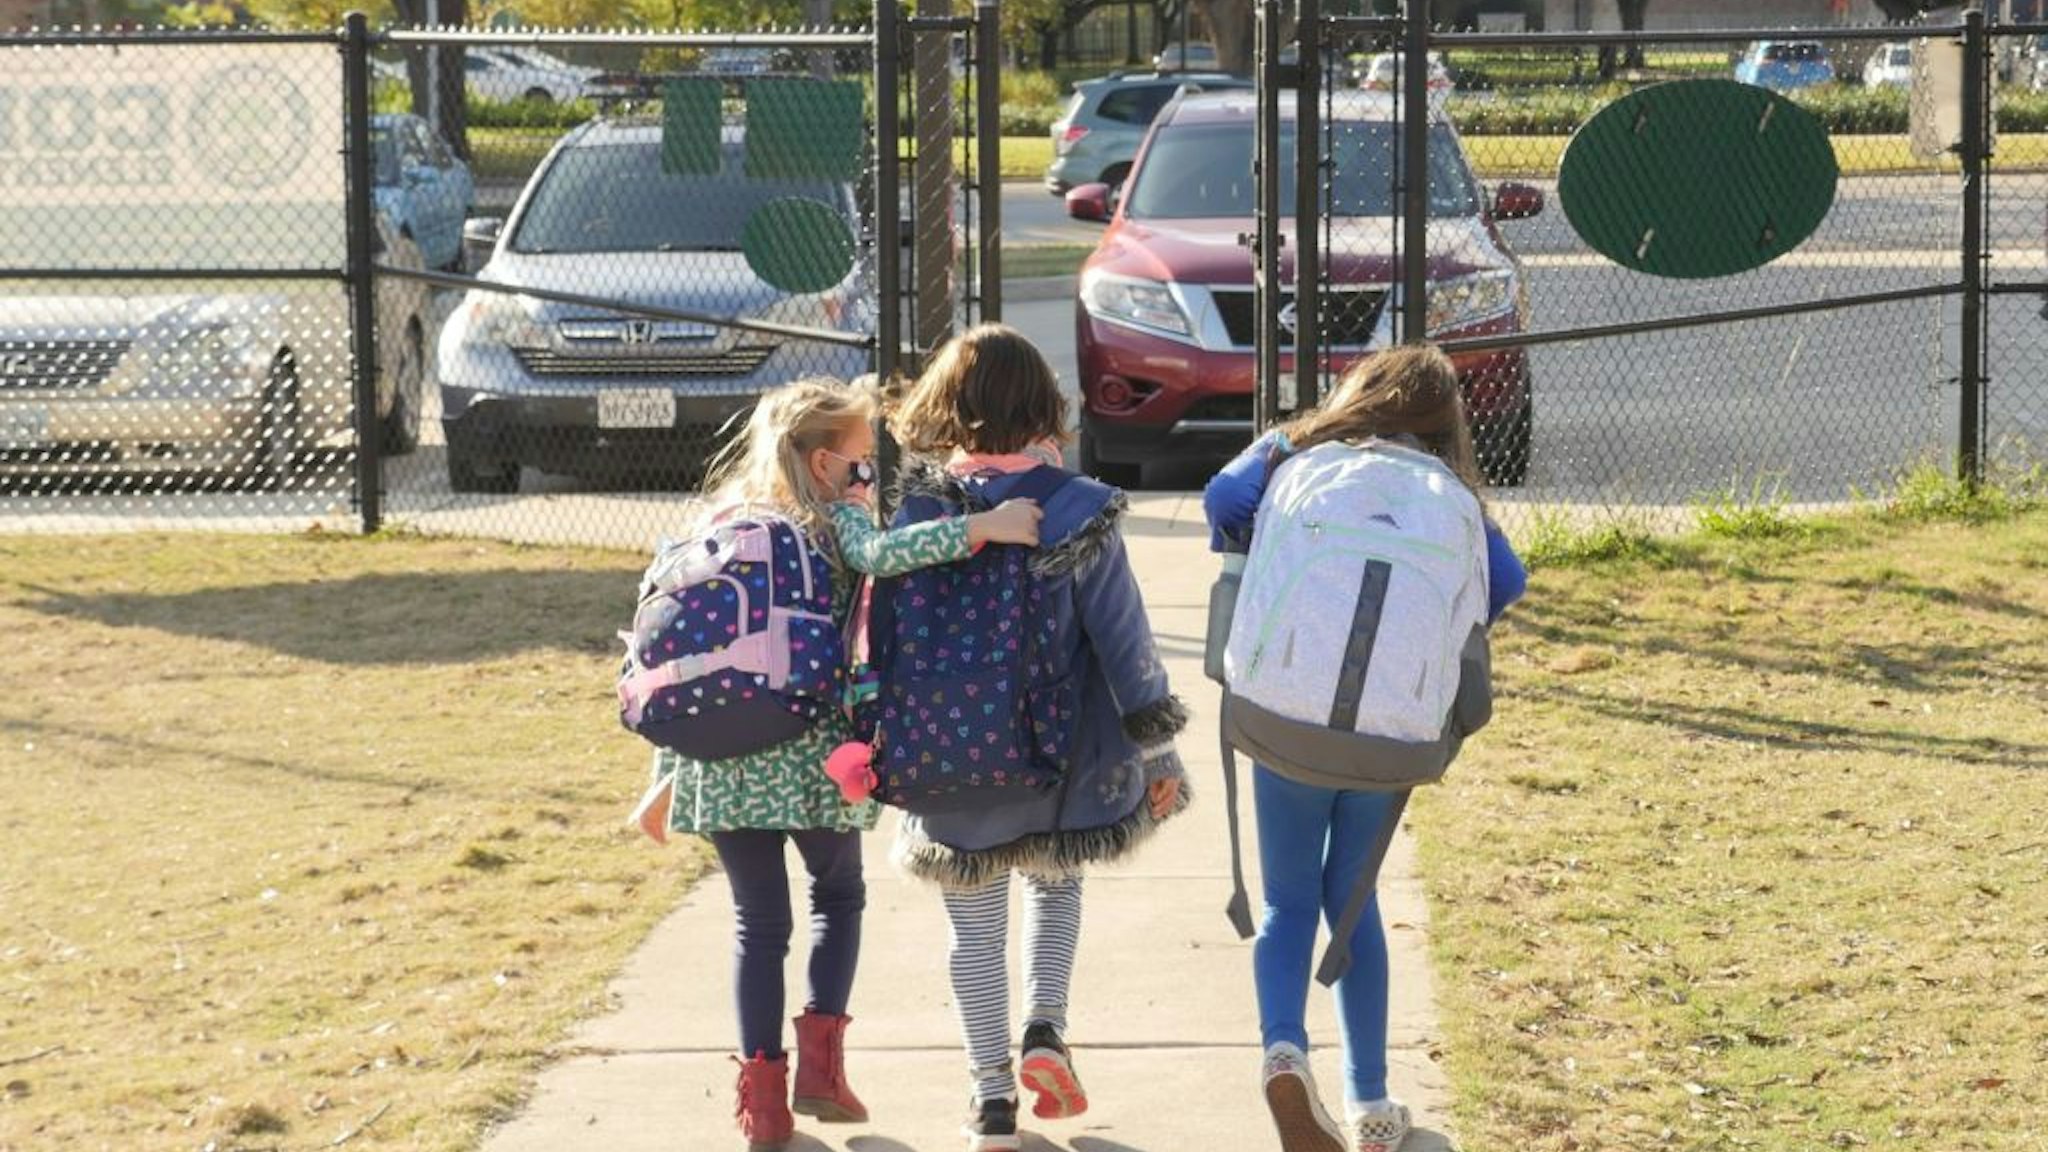 School children wearing facemasks walk outside Condit Elementary School in Bellaire, outside Houston, Texas, on December 16, 2020. - The coronavirus pandemic may be raging in the Houston area, but tens of thousands of students in one district are headed back to in-person classes in January because of poor results while learning from home. The plight of the town of Pasadena is being repeated across America, as educators fret that online learning for children because of the health crisis simply might not work. (Photo by François Picard / AFP) (Photo by FRANCOIS PICARD/AFP via Getty Images)